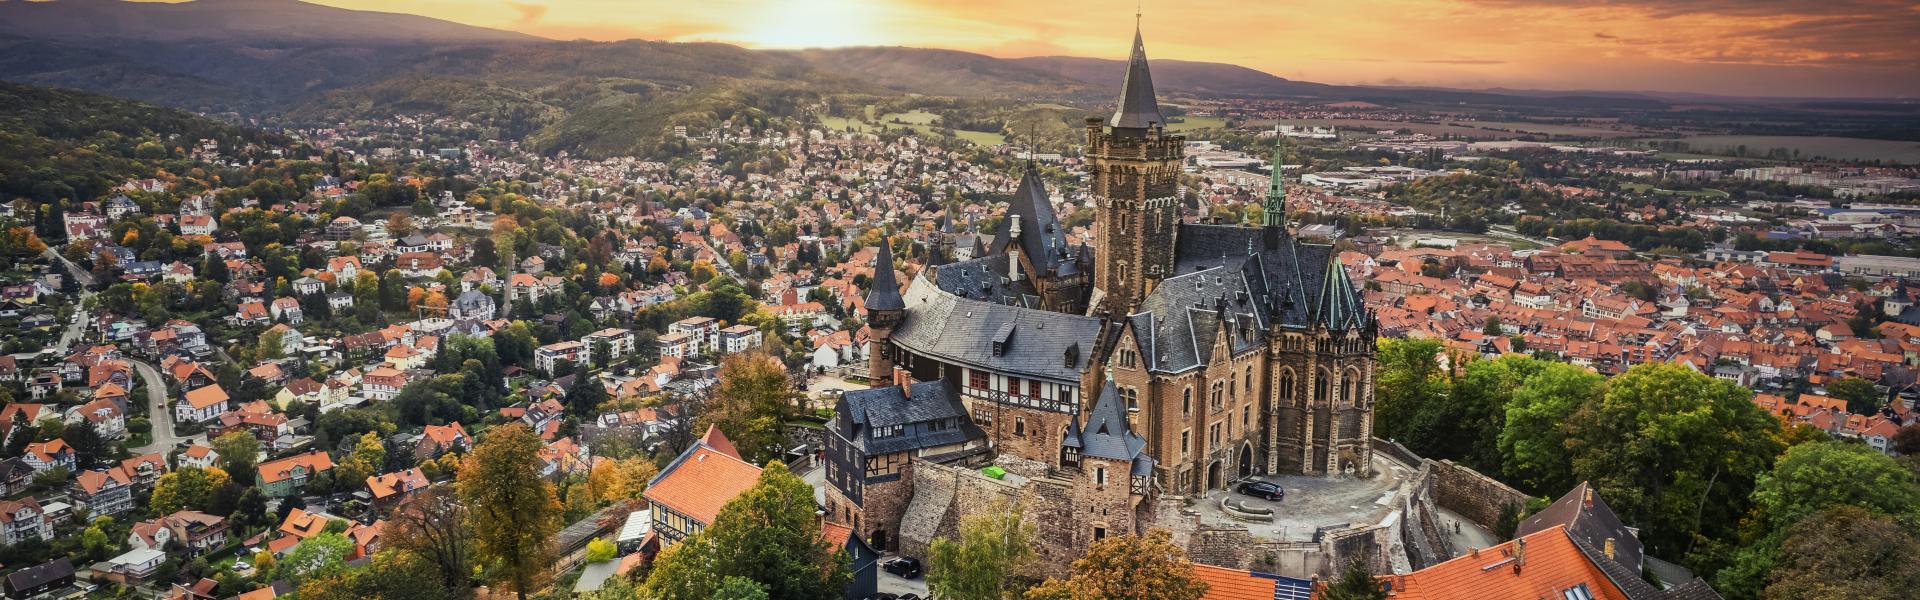 Wernigerode Scenic View